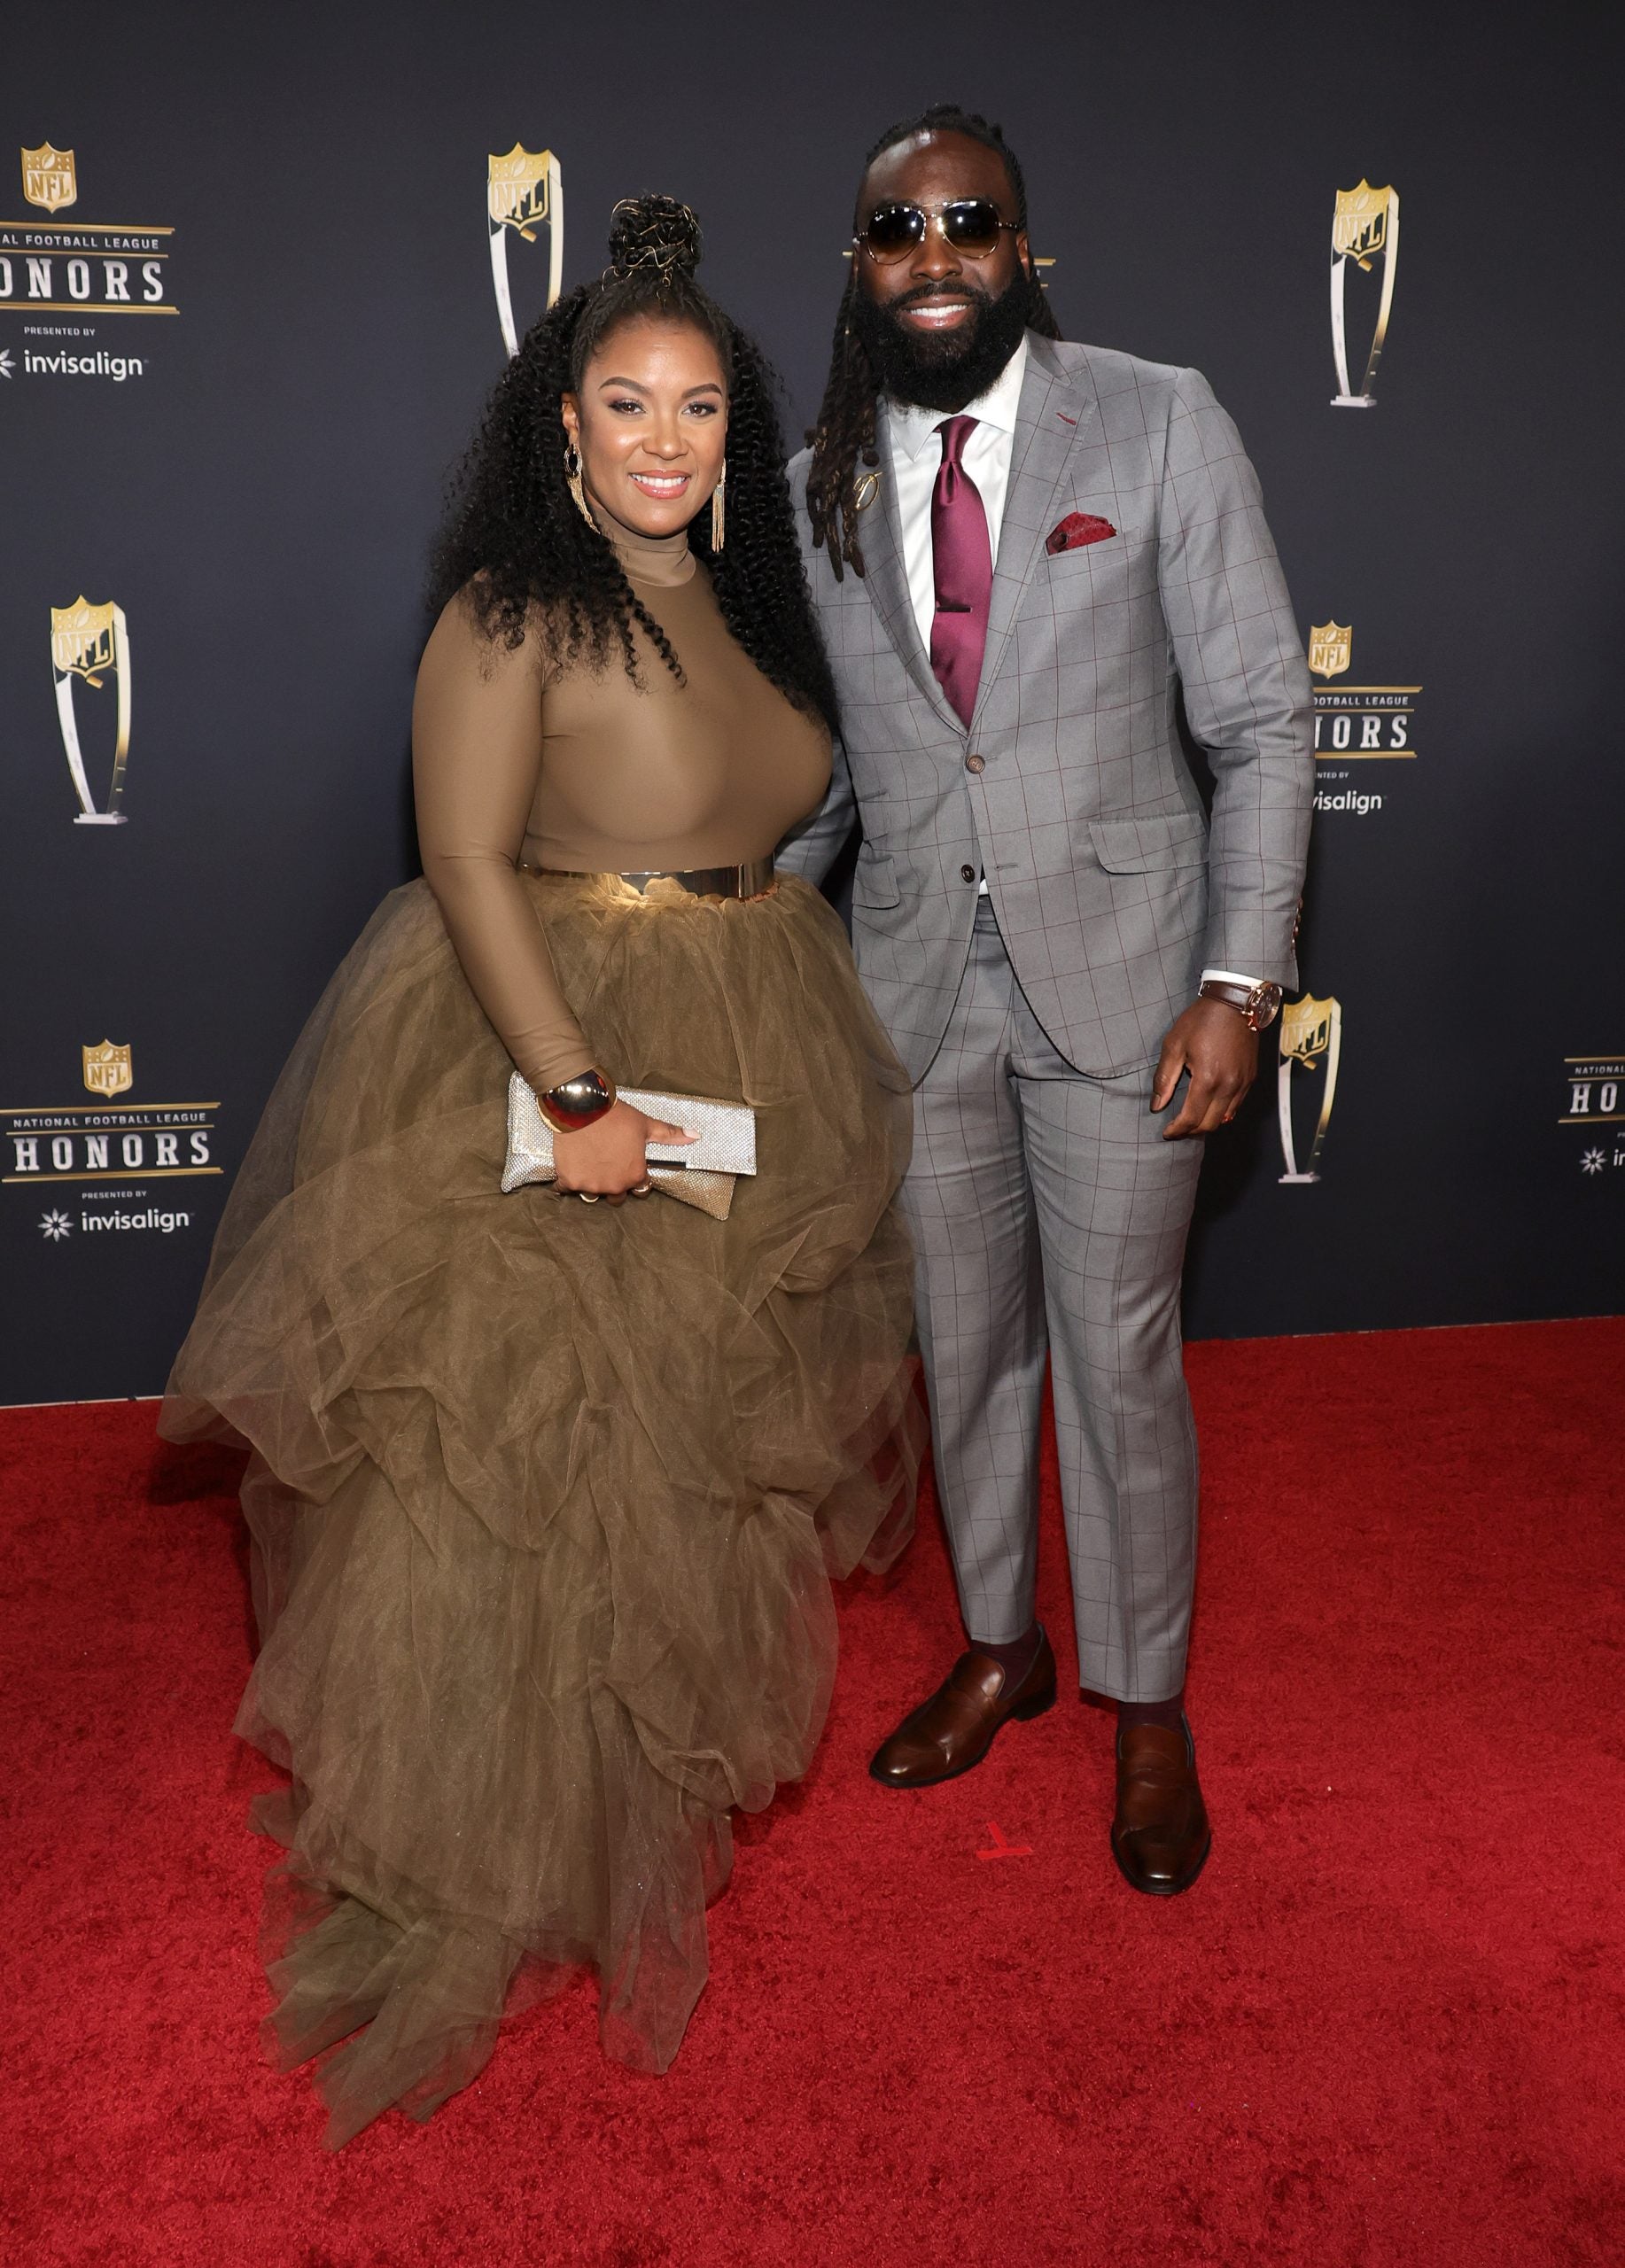 Black NFL Wives Do Exist: 12 Players And Their Partners We’re Rooting For